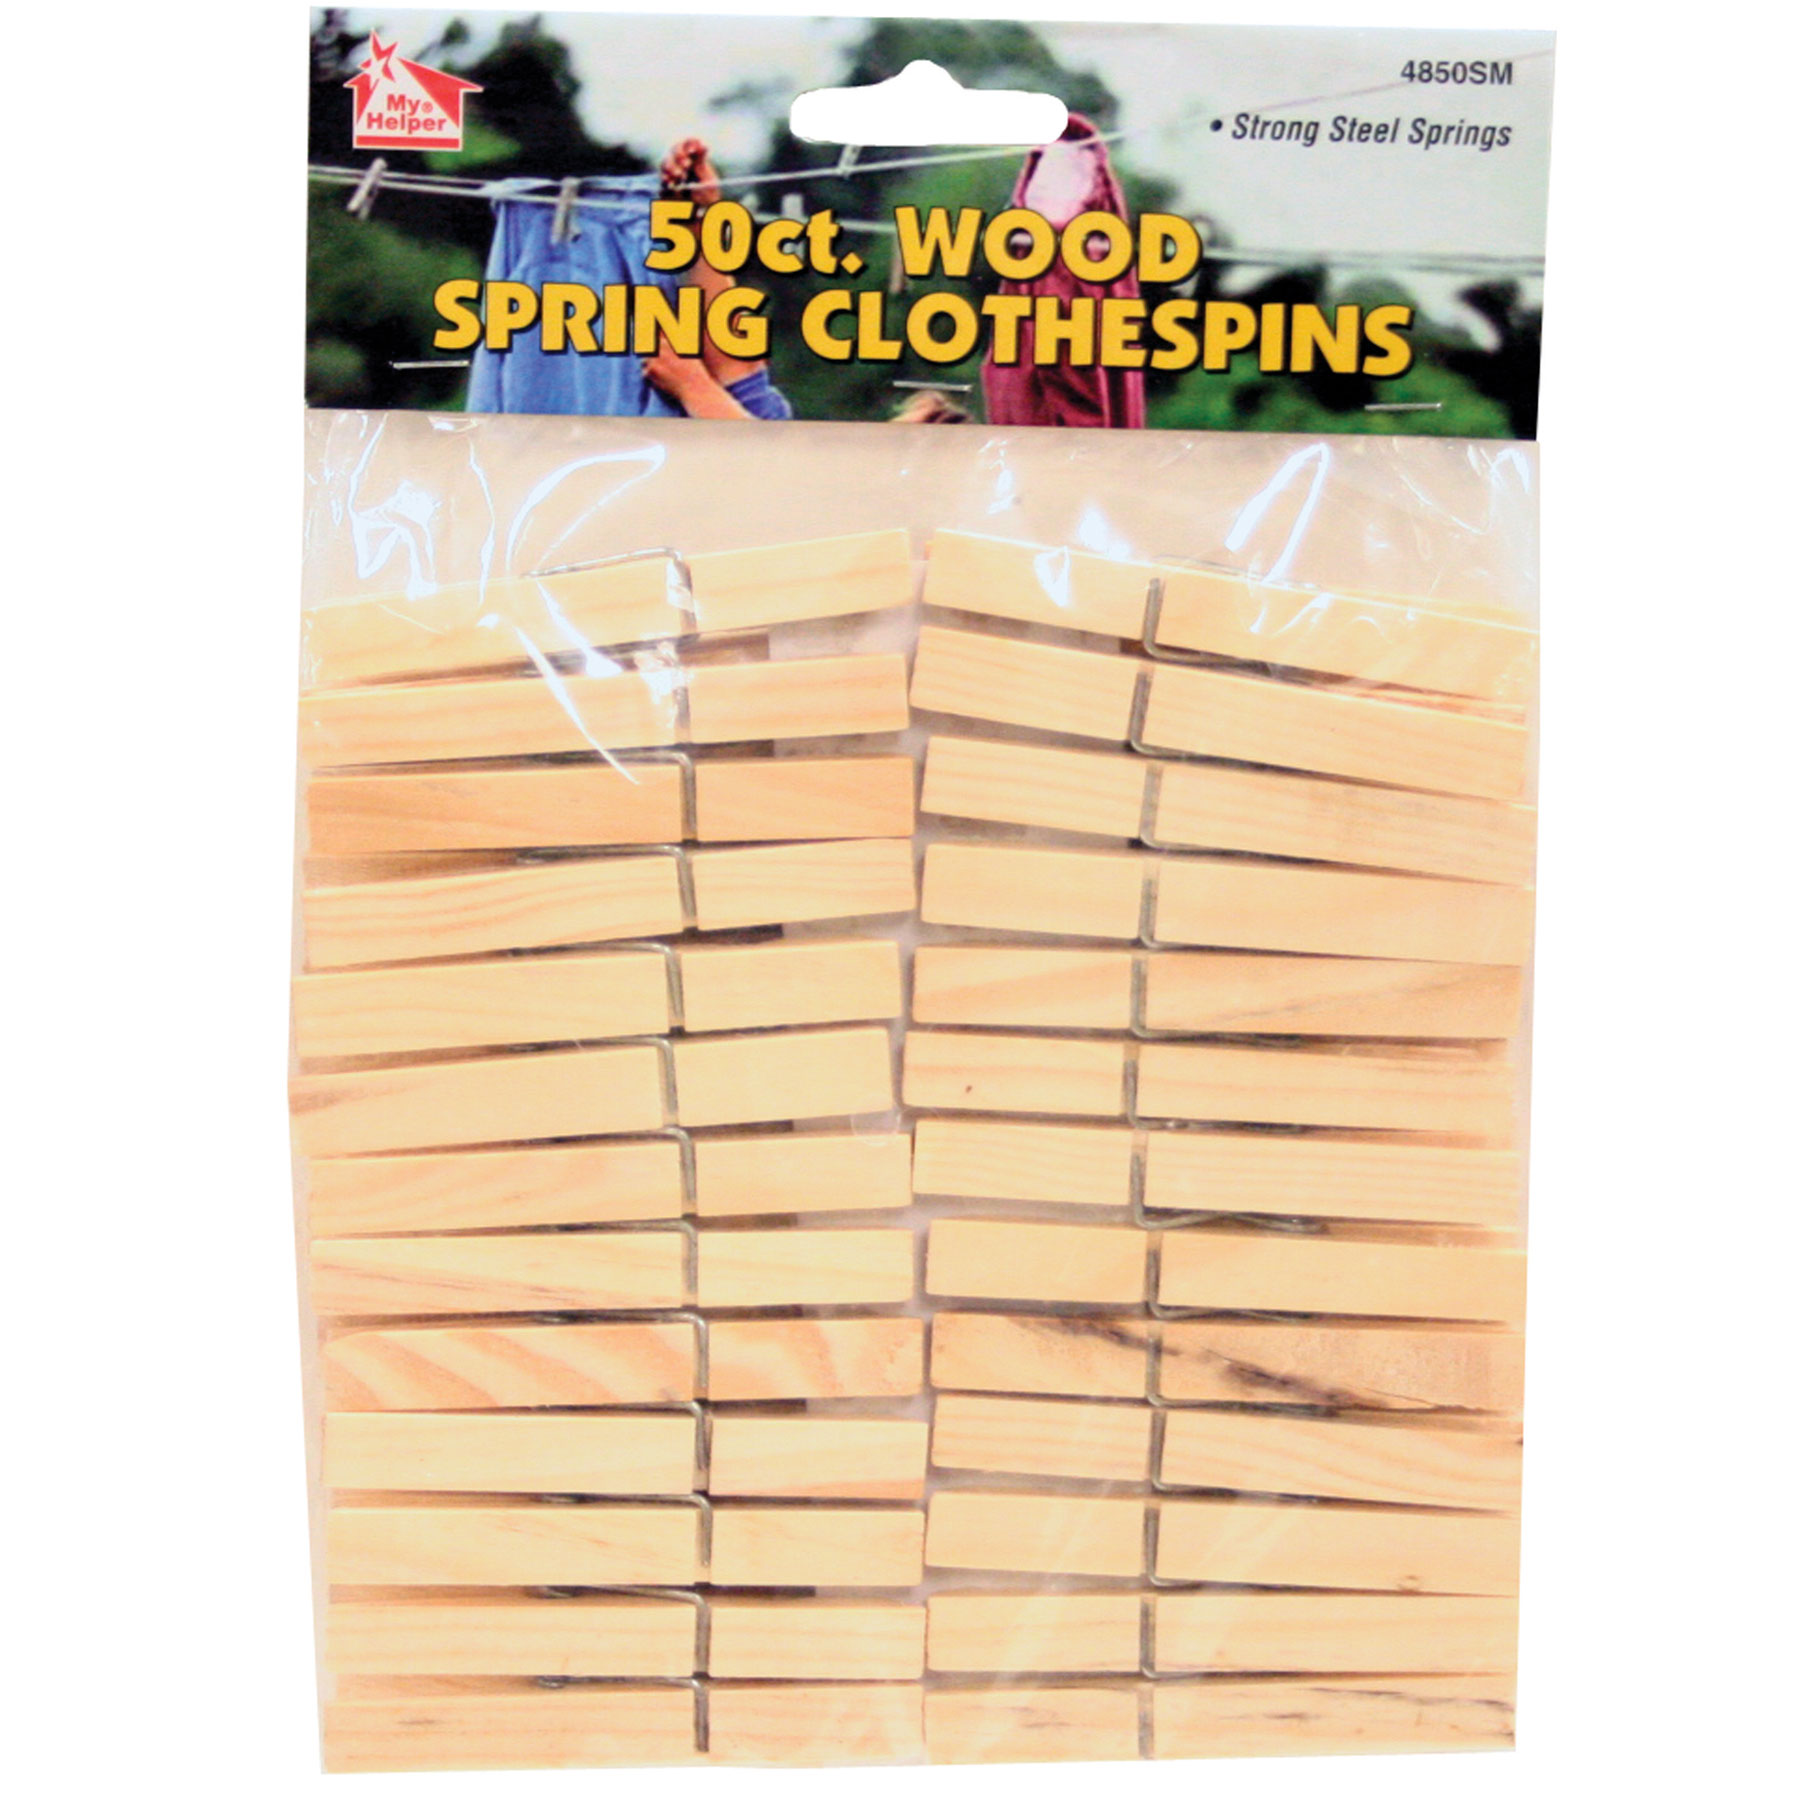 CLOTHESPINS WOOD SPRING